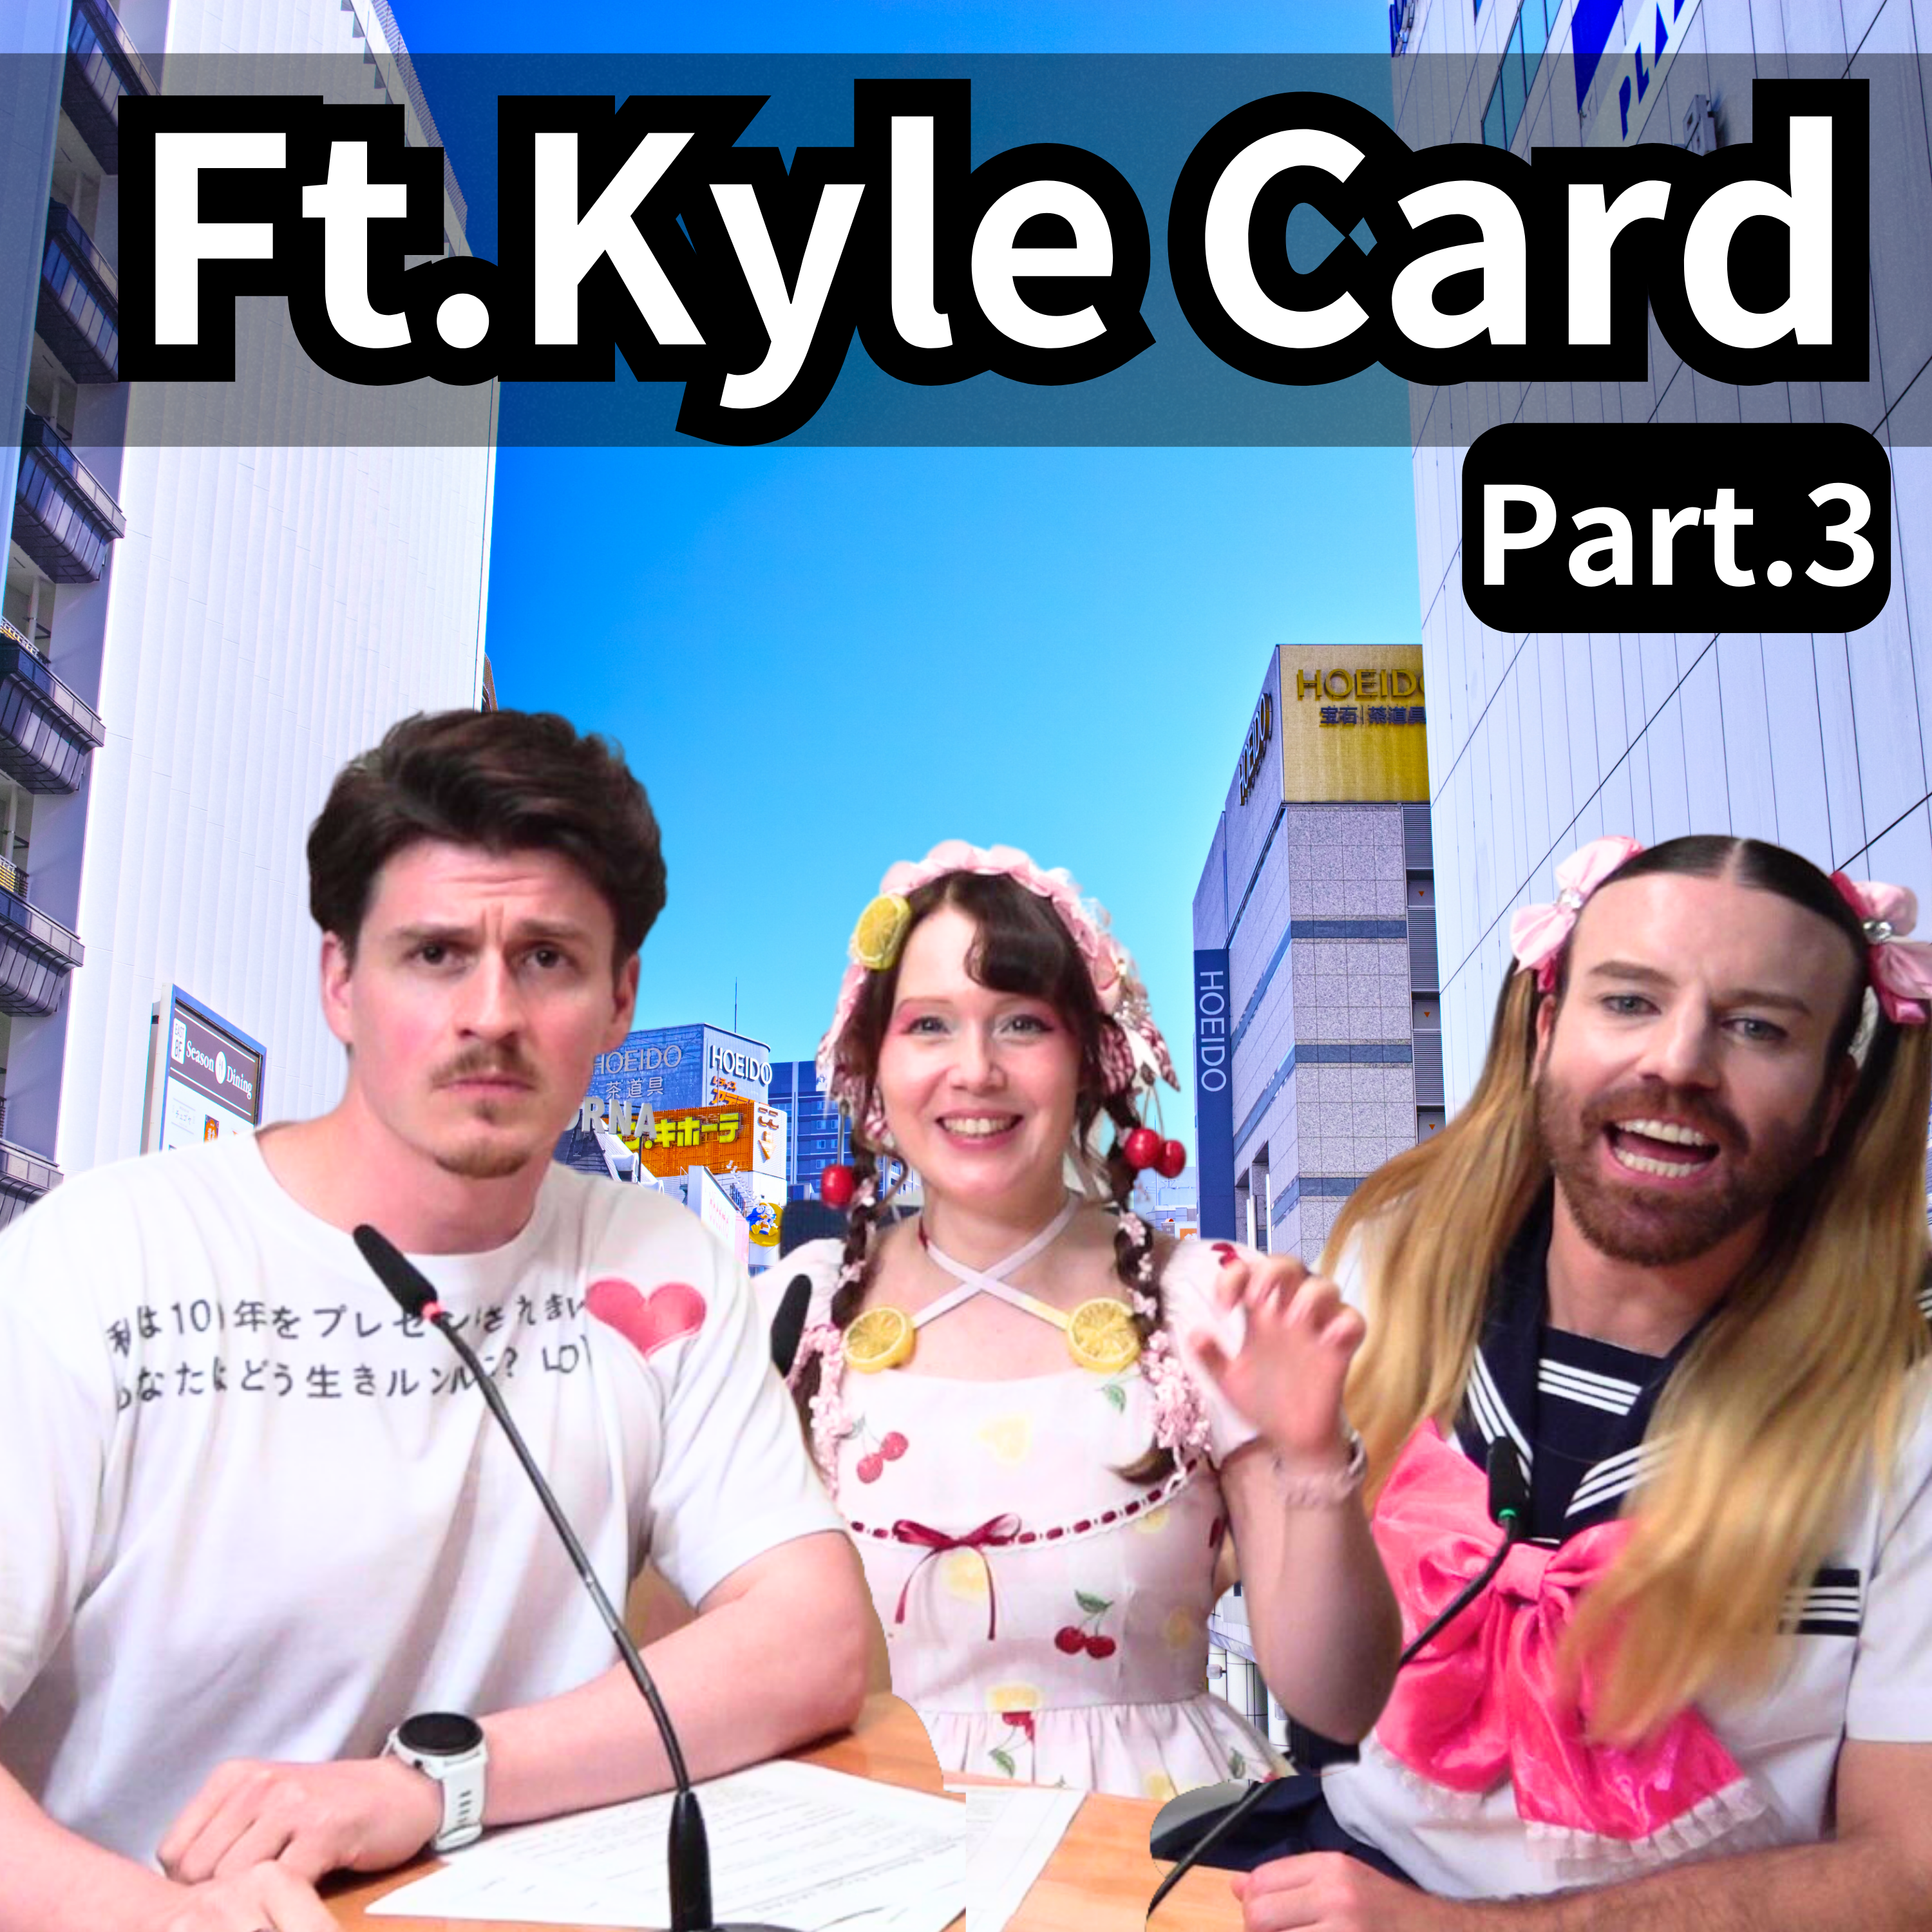 #69 - Hard Experiences from TV Appearances/ What Kind of Town is Machida? ft. Kyle Card (Actor)